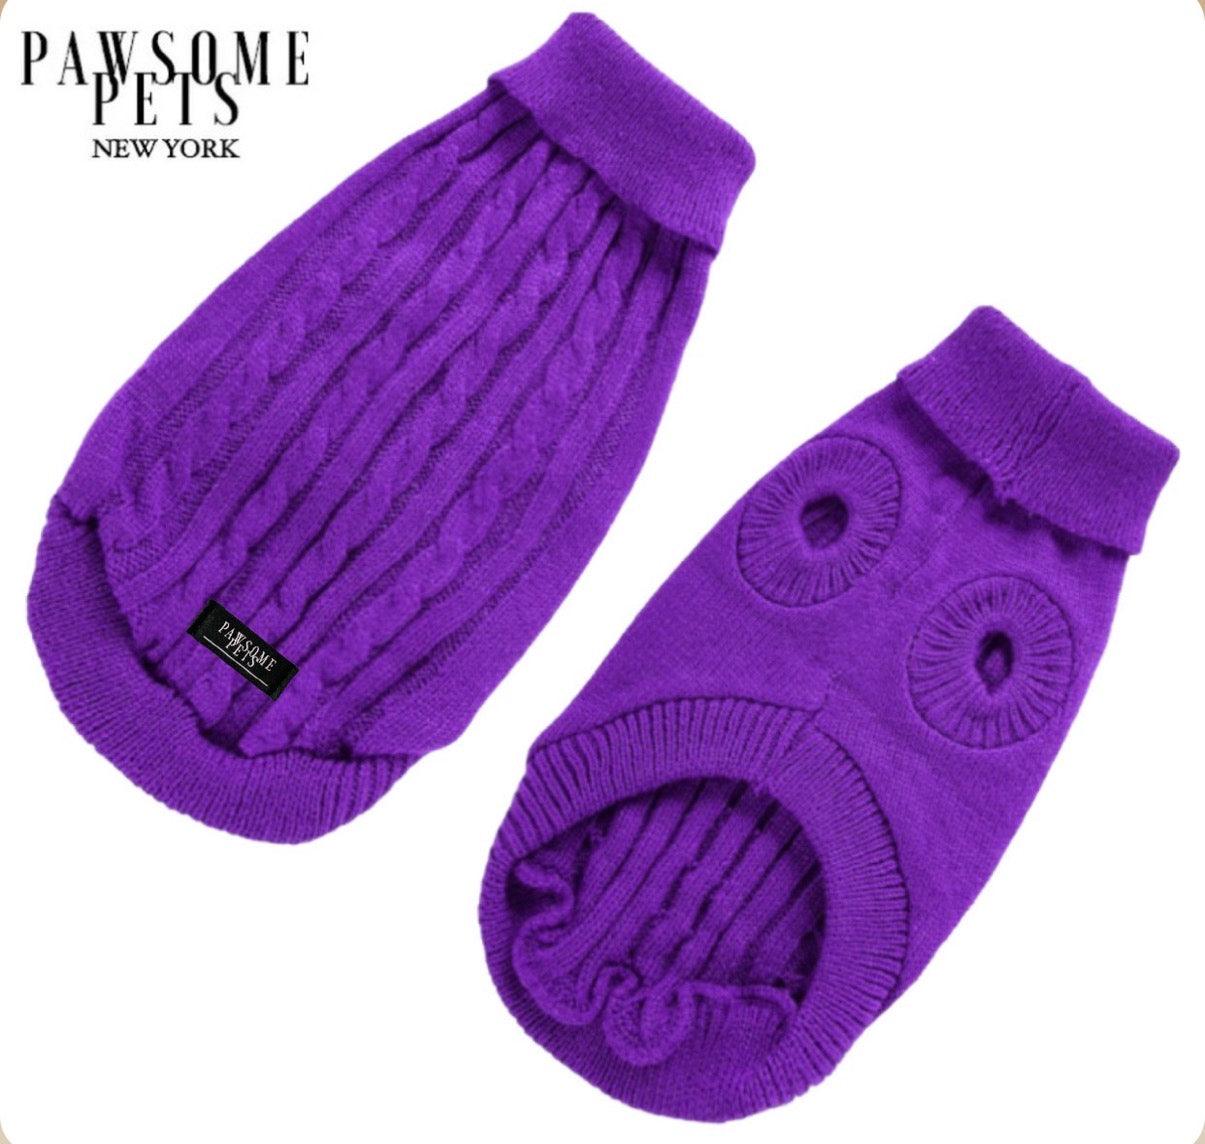 DOG AND CAT CABLE KNIT SWEATER - PURPLE - Pawsomepetsnewyork